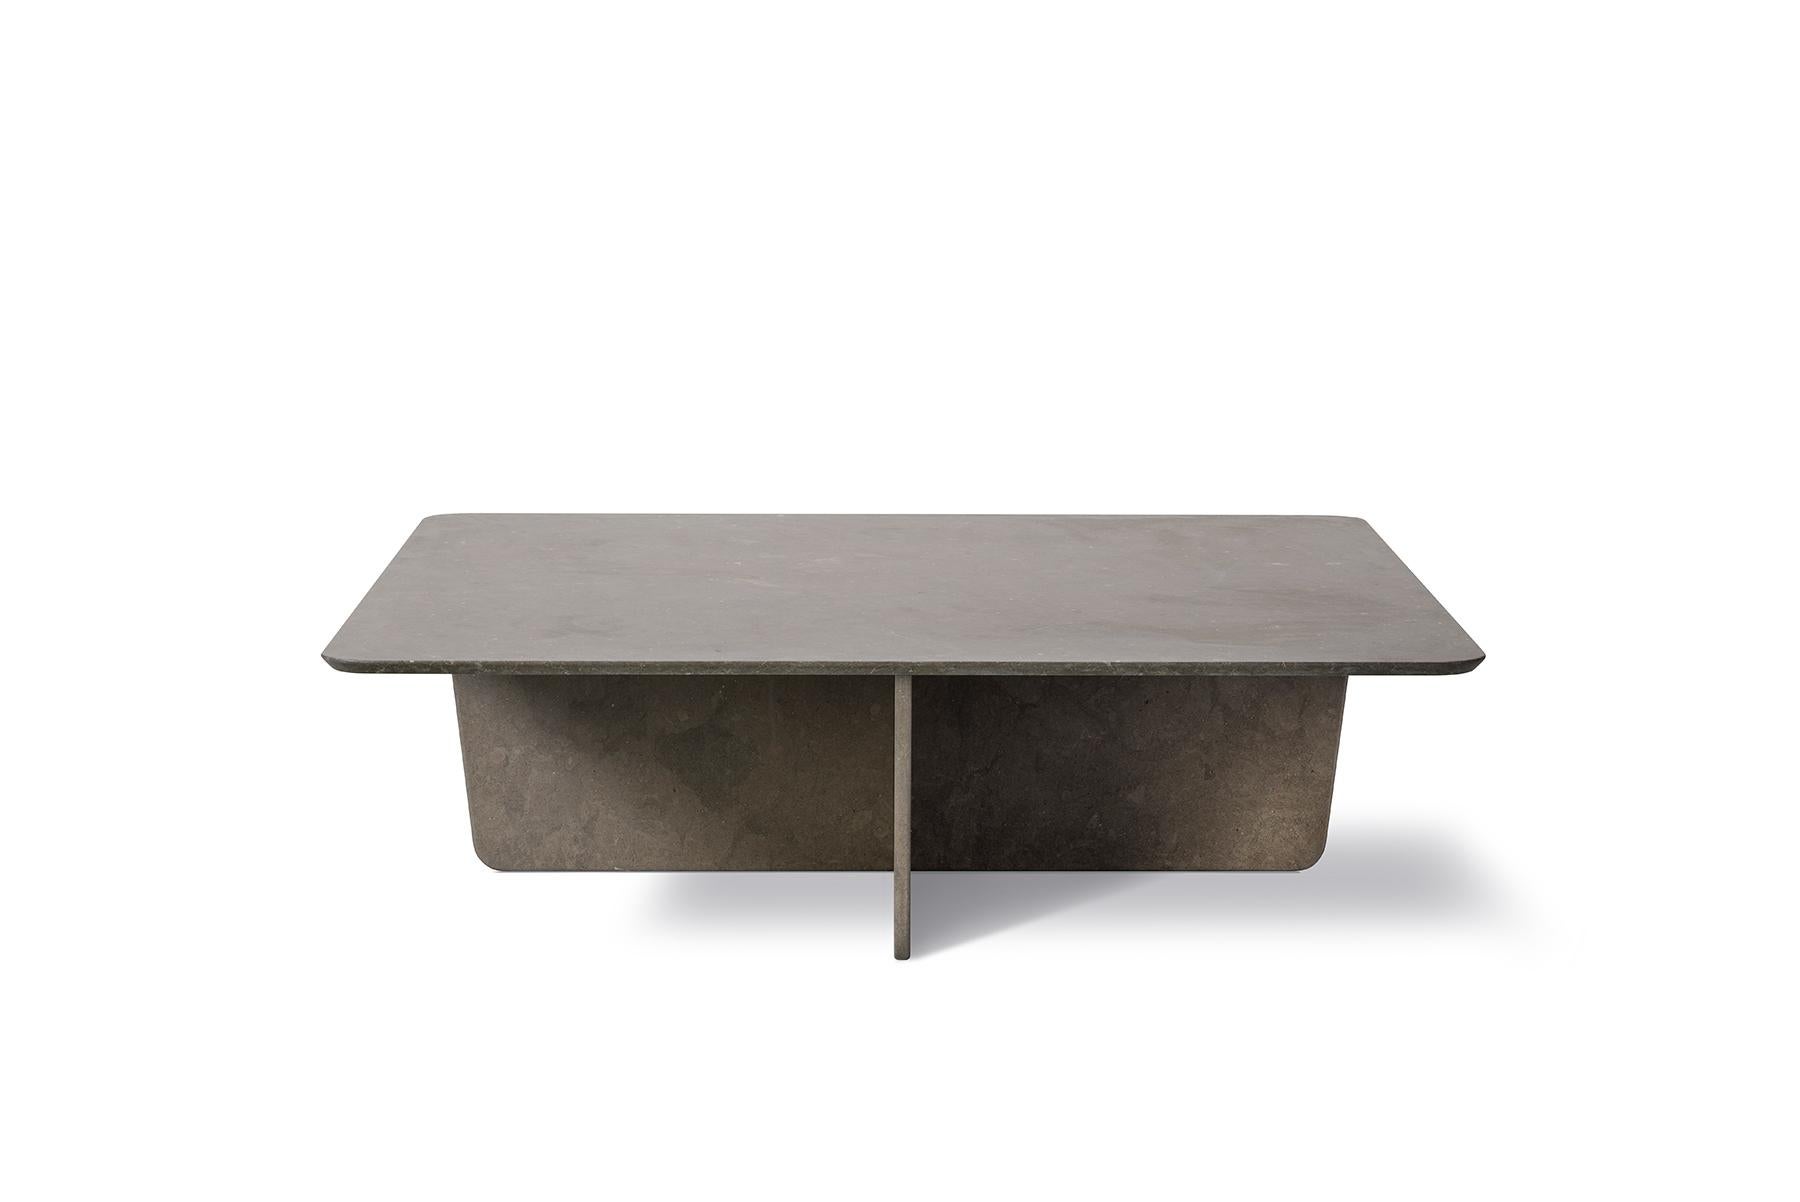 Space Copenhagen tableau stone coffee table – rectangle.
The Tableau series in stone reflects a passion for natural materials that runs deep in our DNA, involving expert craftmanship that lies at the core of our company. With its graceful geometric